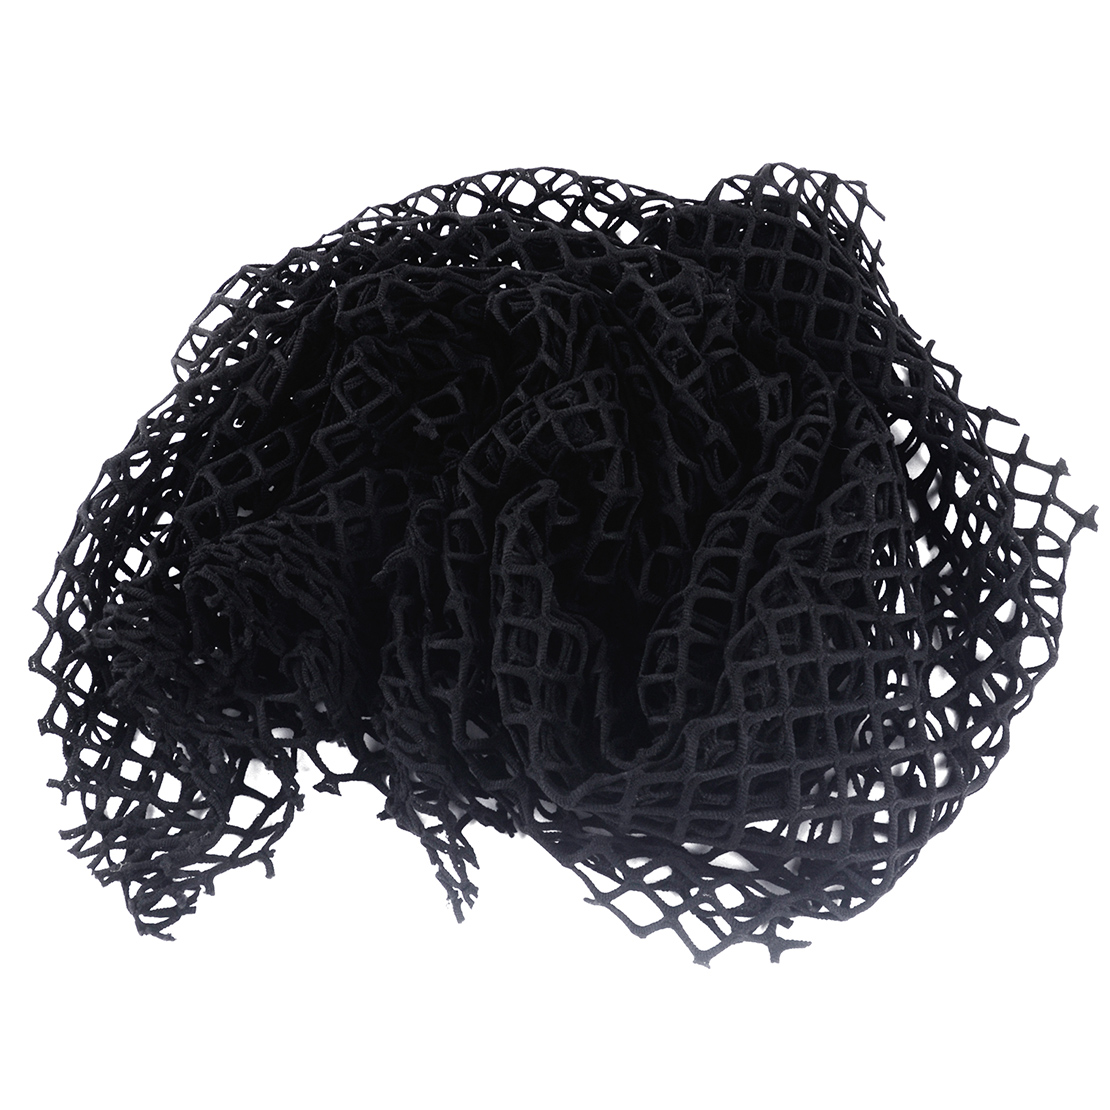 Sexy Fish Net Mesh Effect Cool Stretchy Craft Fabric Large Holes Black  White New